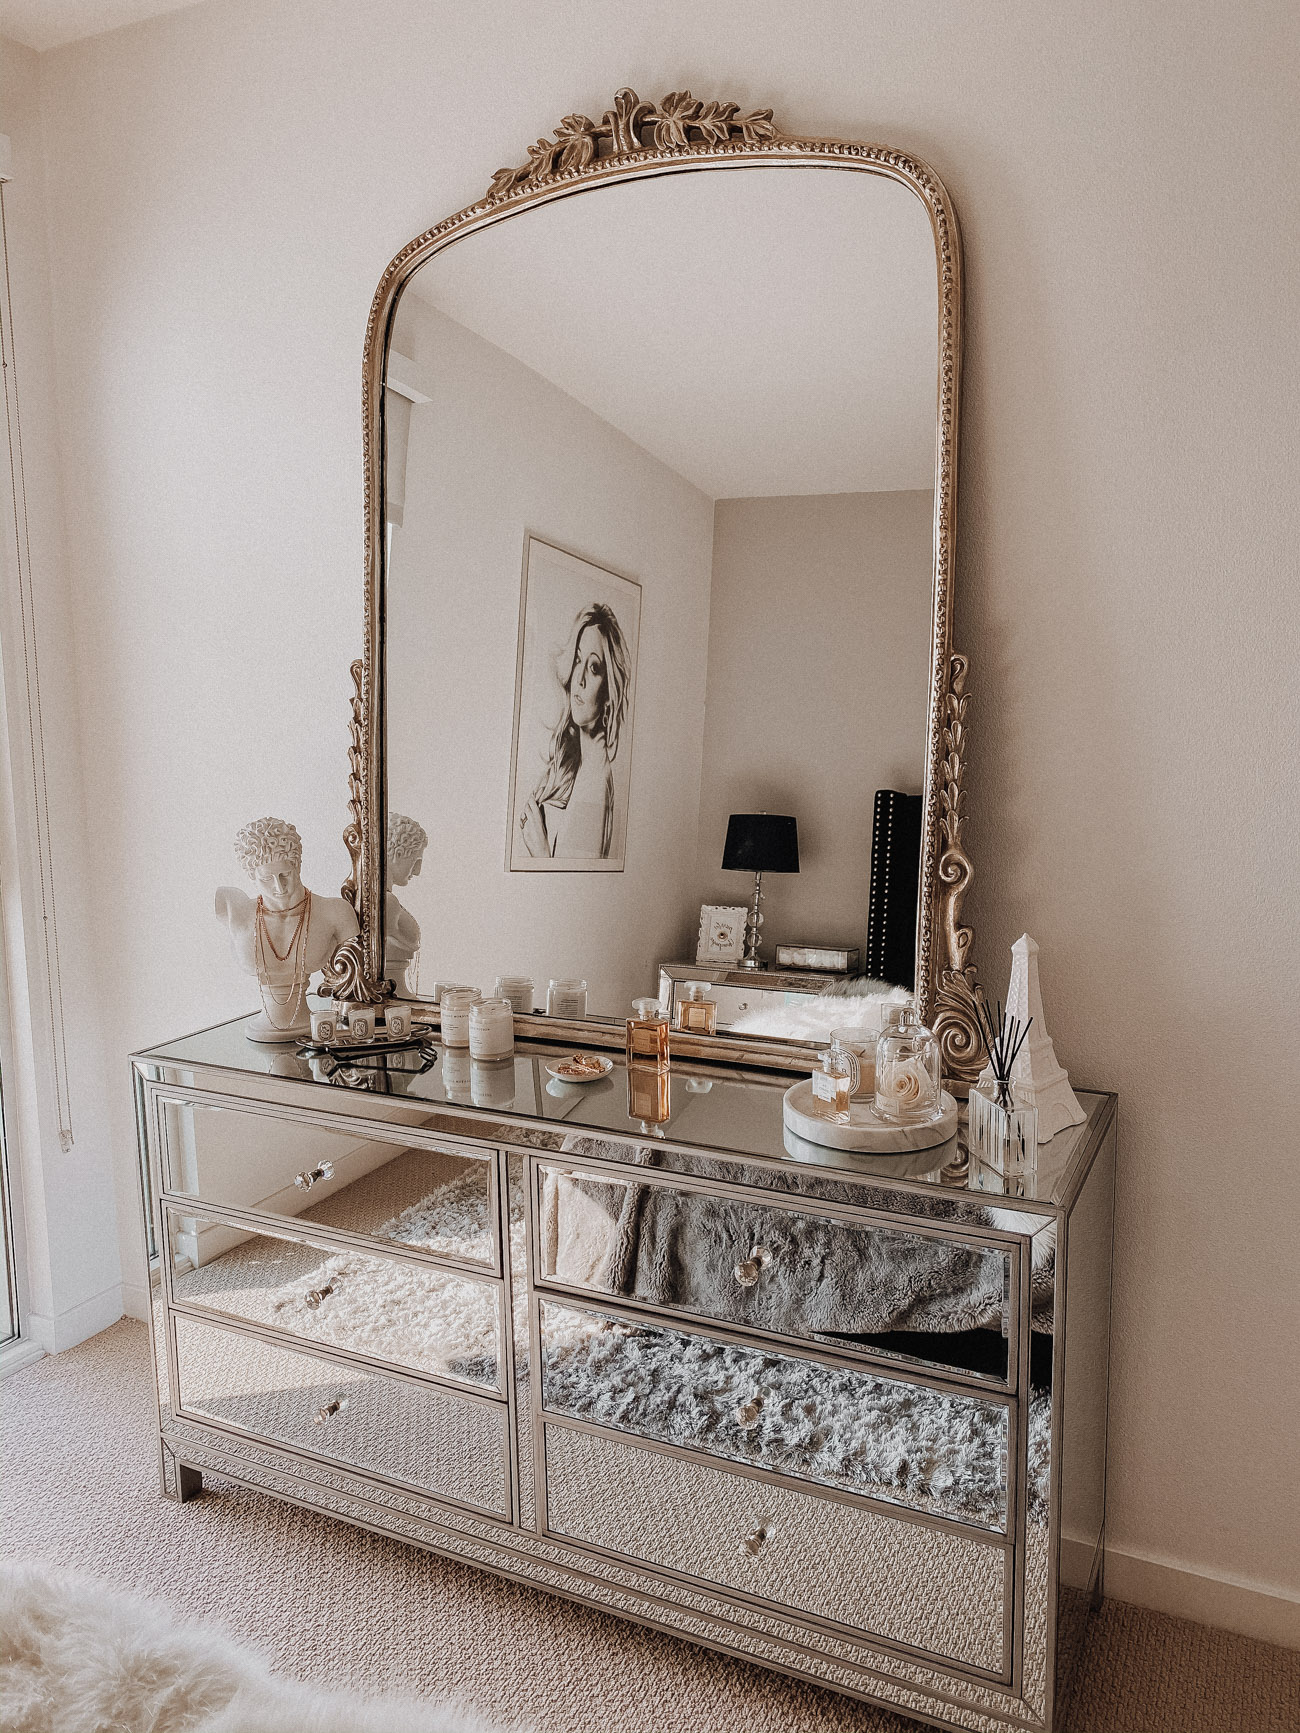 The Anthropologie Mirror | Mirrored Decor | Dresser Decor | Styling a Mirrored Dresser | Bedroom Decor | Blondie in the City by Hayley Larue